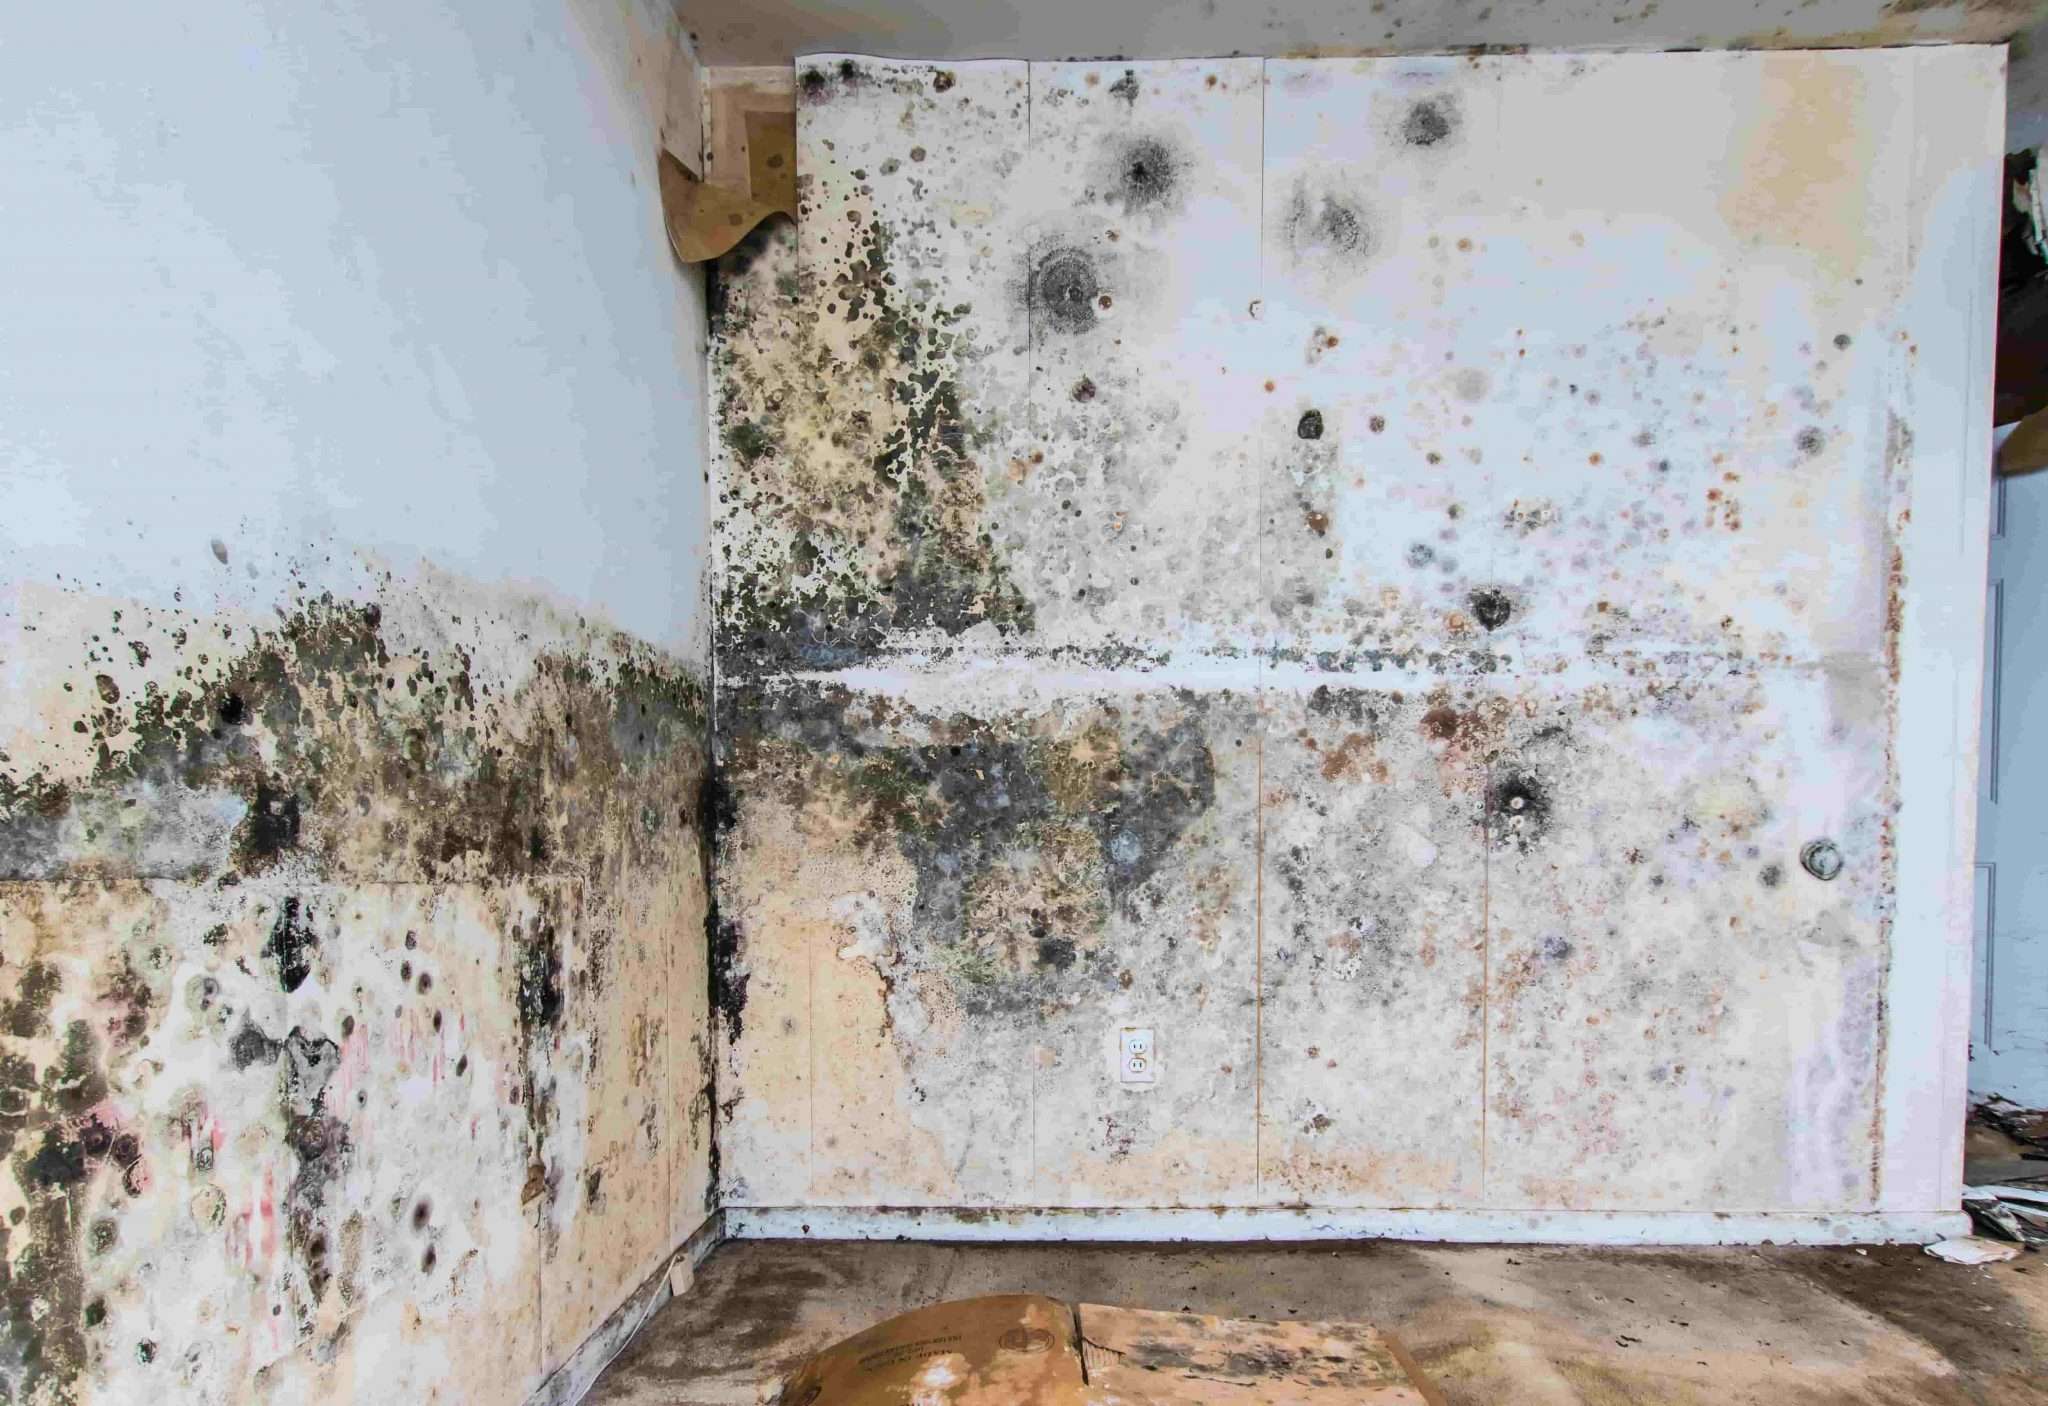 How to Tackle Mold after Water Damage?